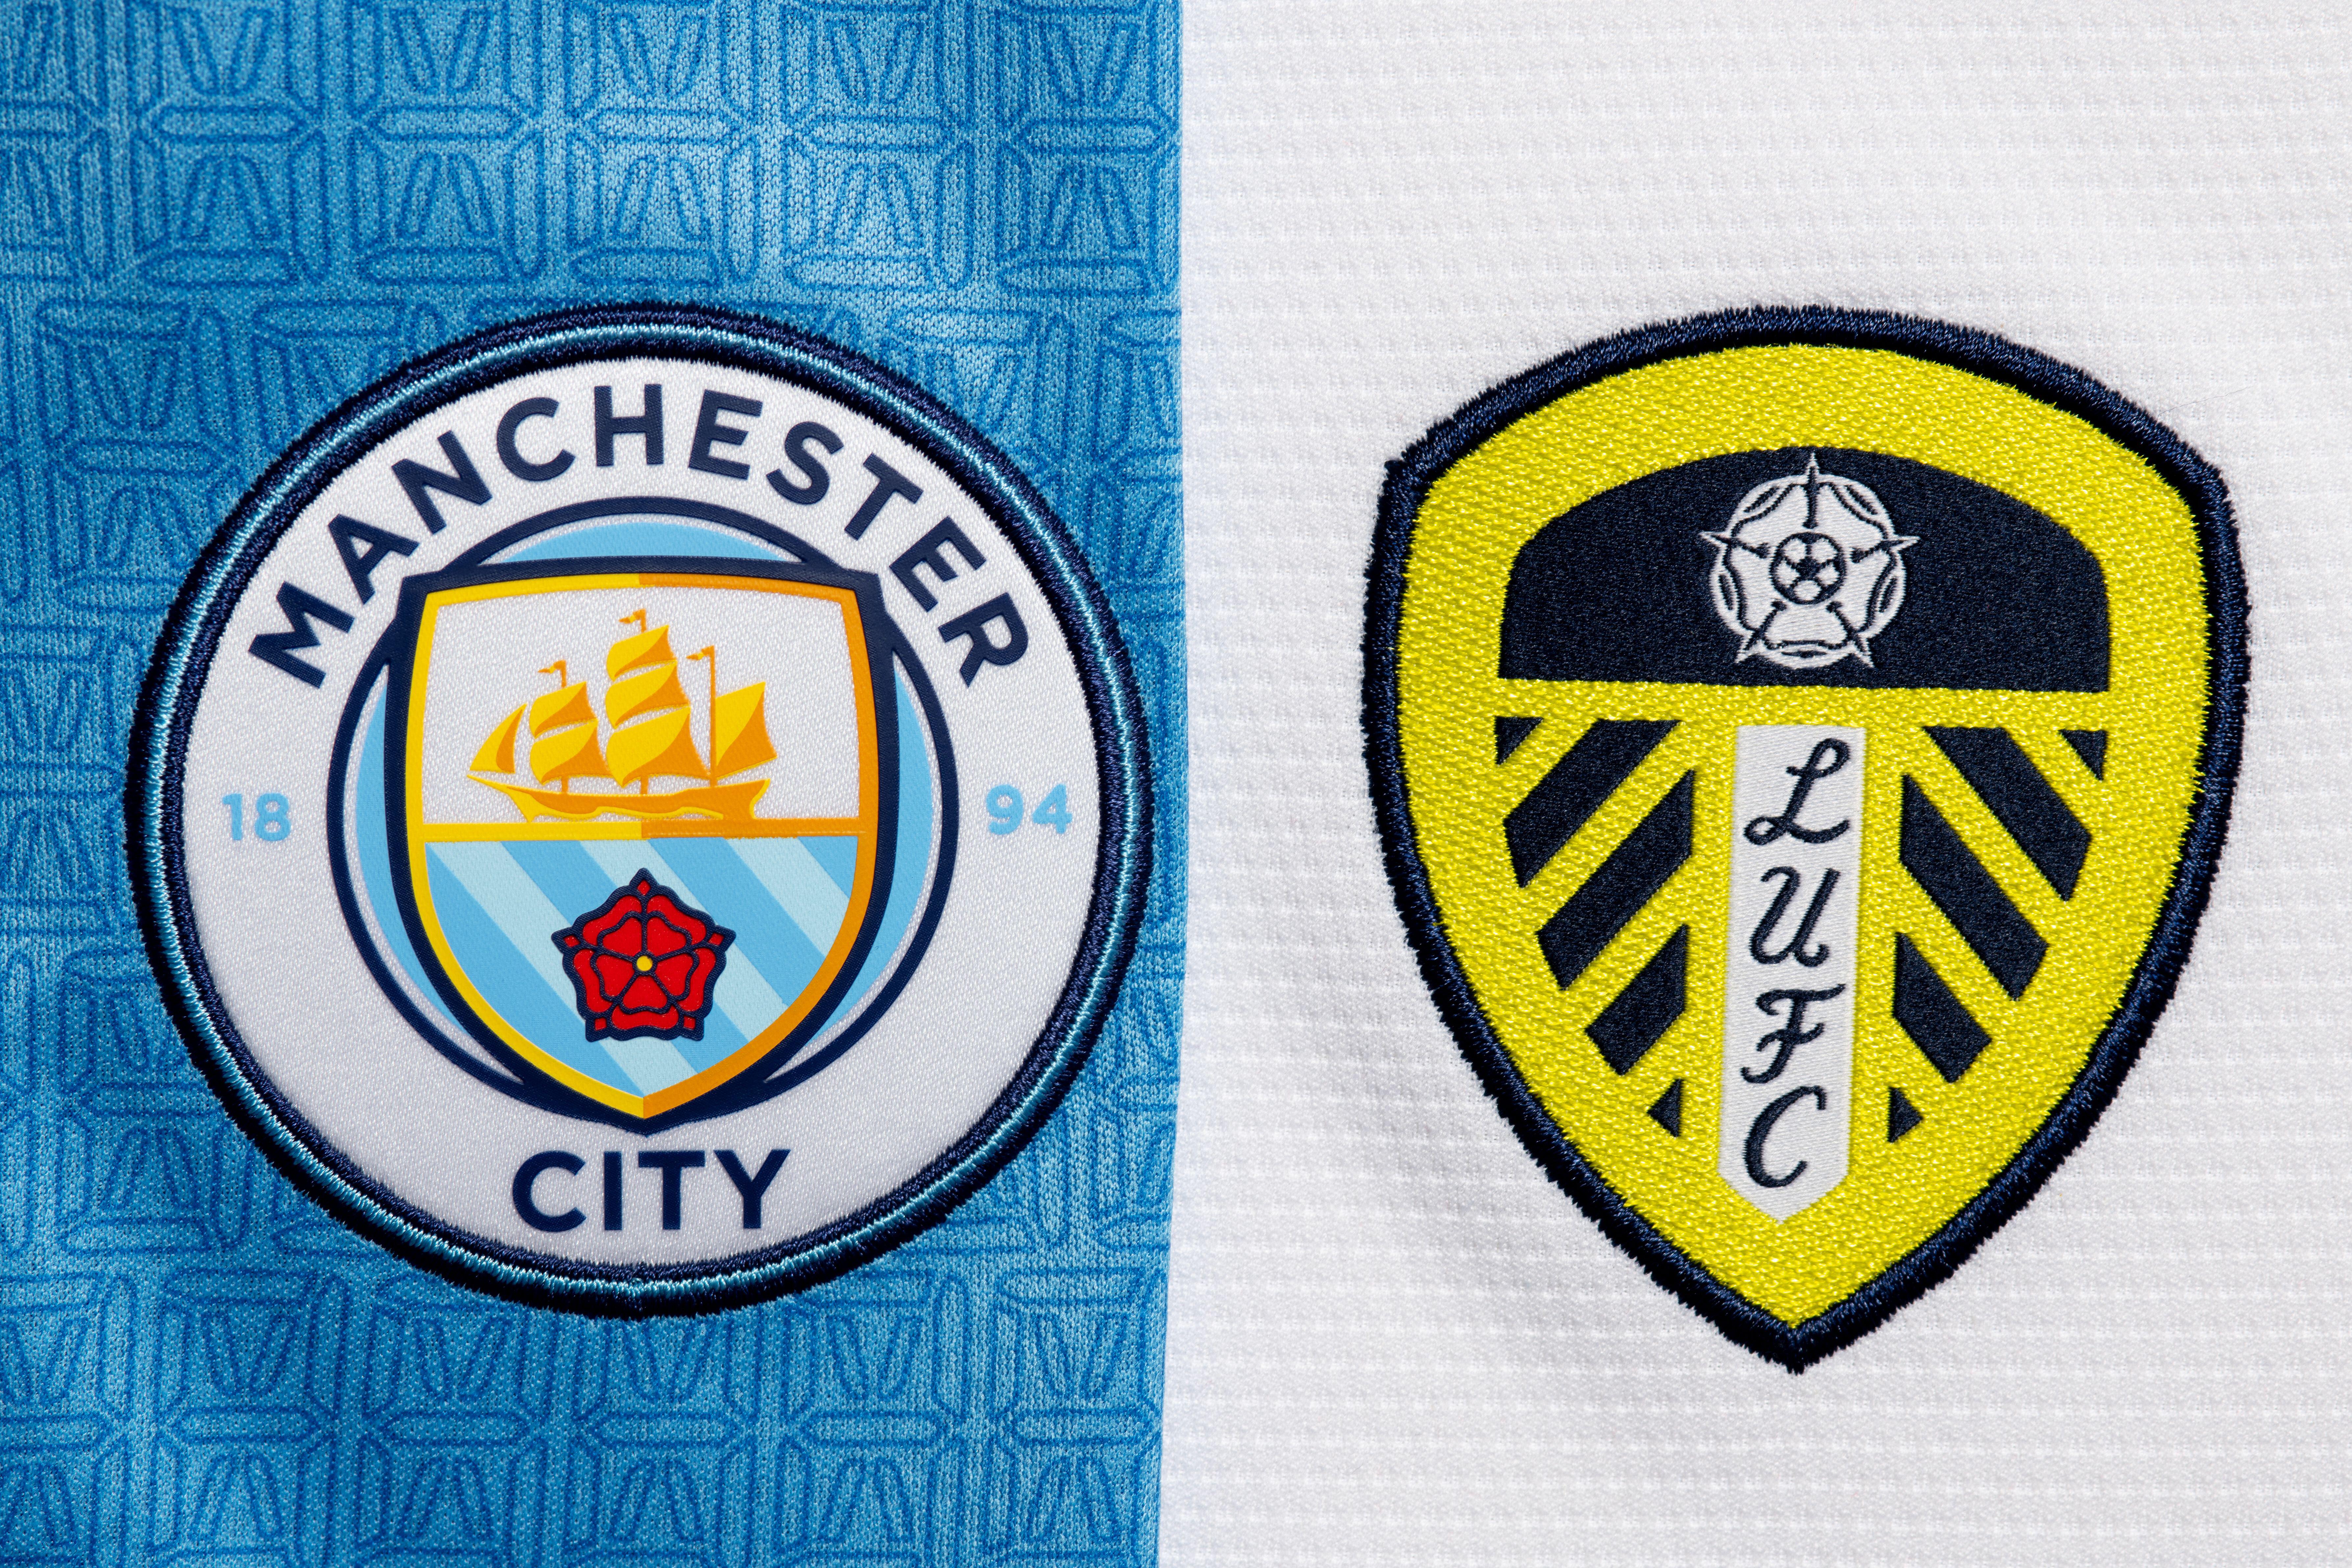 Leeds United vs Manchester City betting tips Premier League preview, predictions, team news and odds